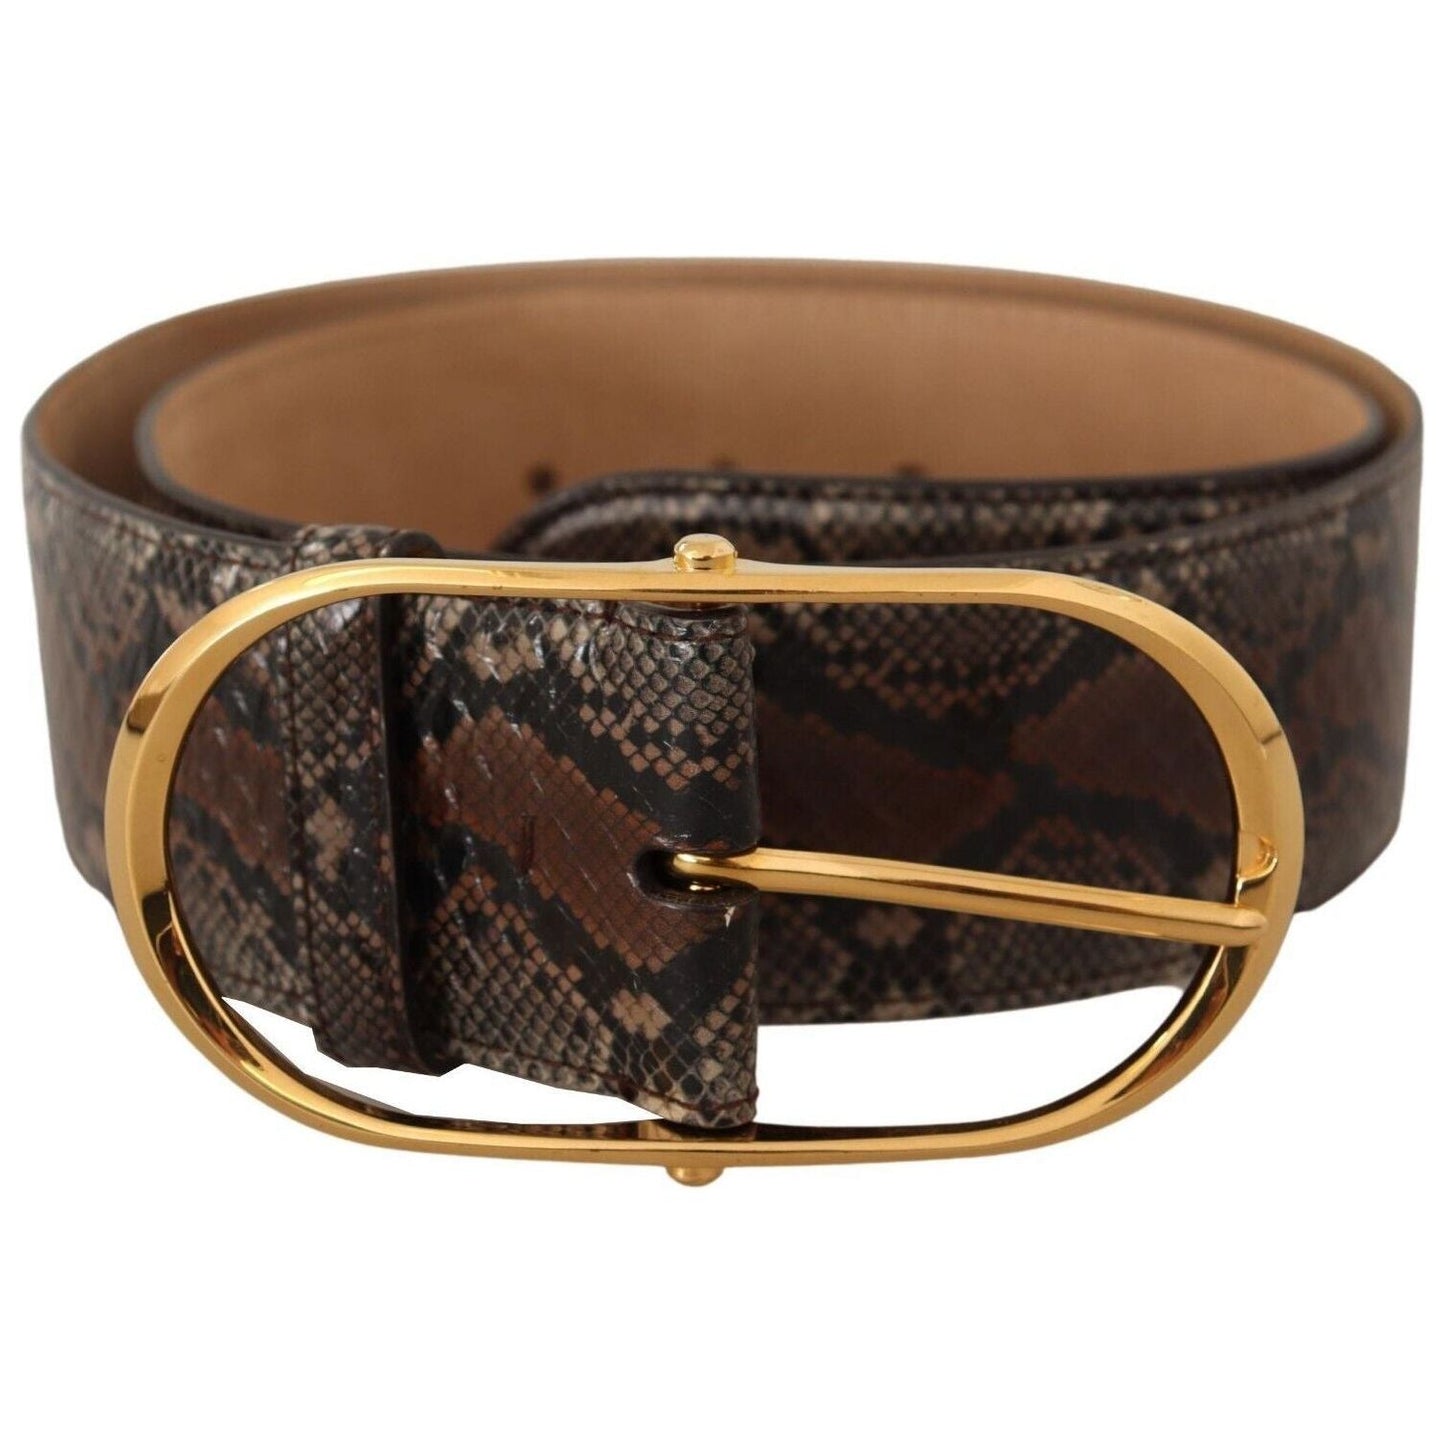 Dolce & Gabbana Elegant Brown Leather Belt with Gold Buckle WOMAN BELTS brown-exotic-leather-gold-oval-buckle-belt-5 s-l1600-2-276-f01ab159-7ee.jpg